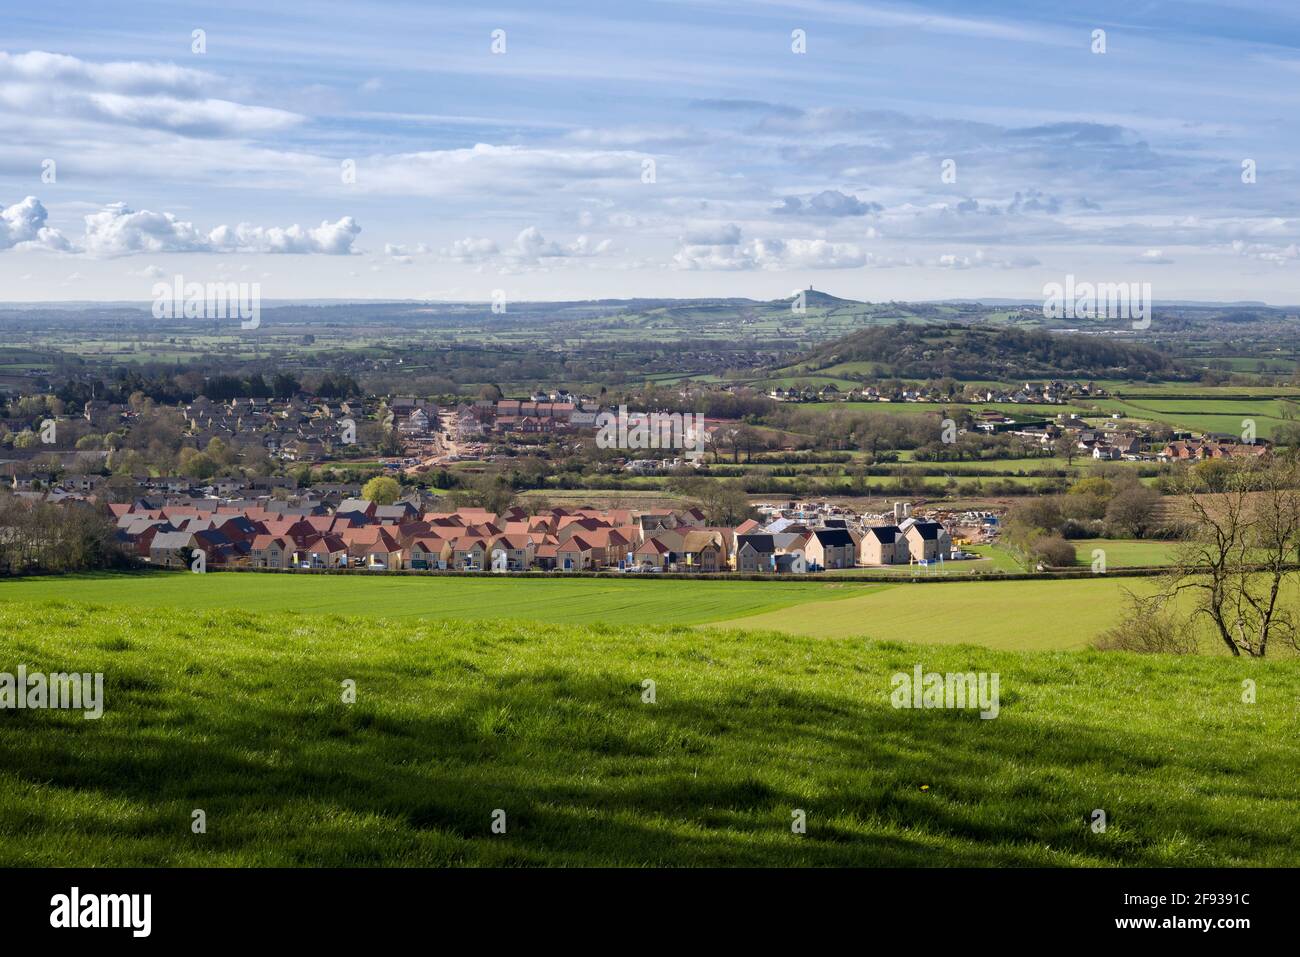 Large new housing estates being constructed on the outskirts of the City of Wells on the edge of the Mendip Hills, Somerset, England. Stock Photo